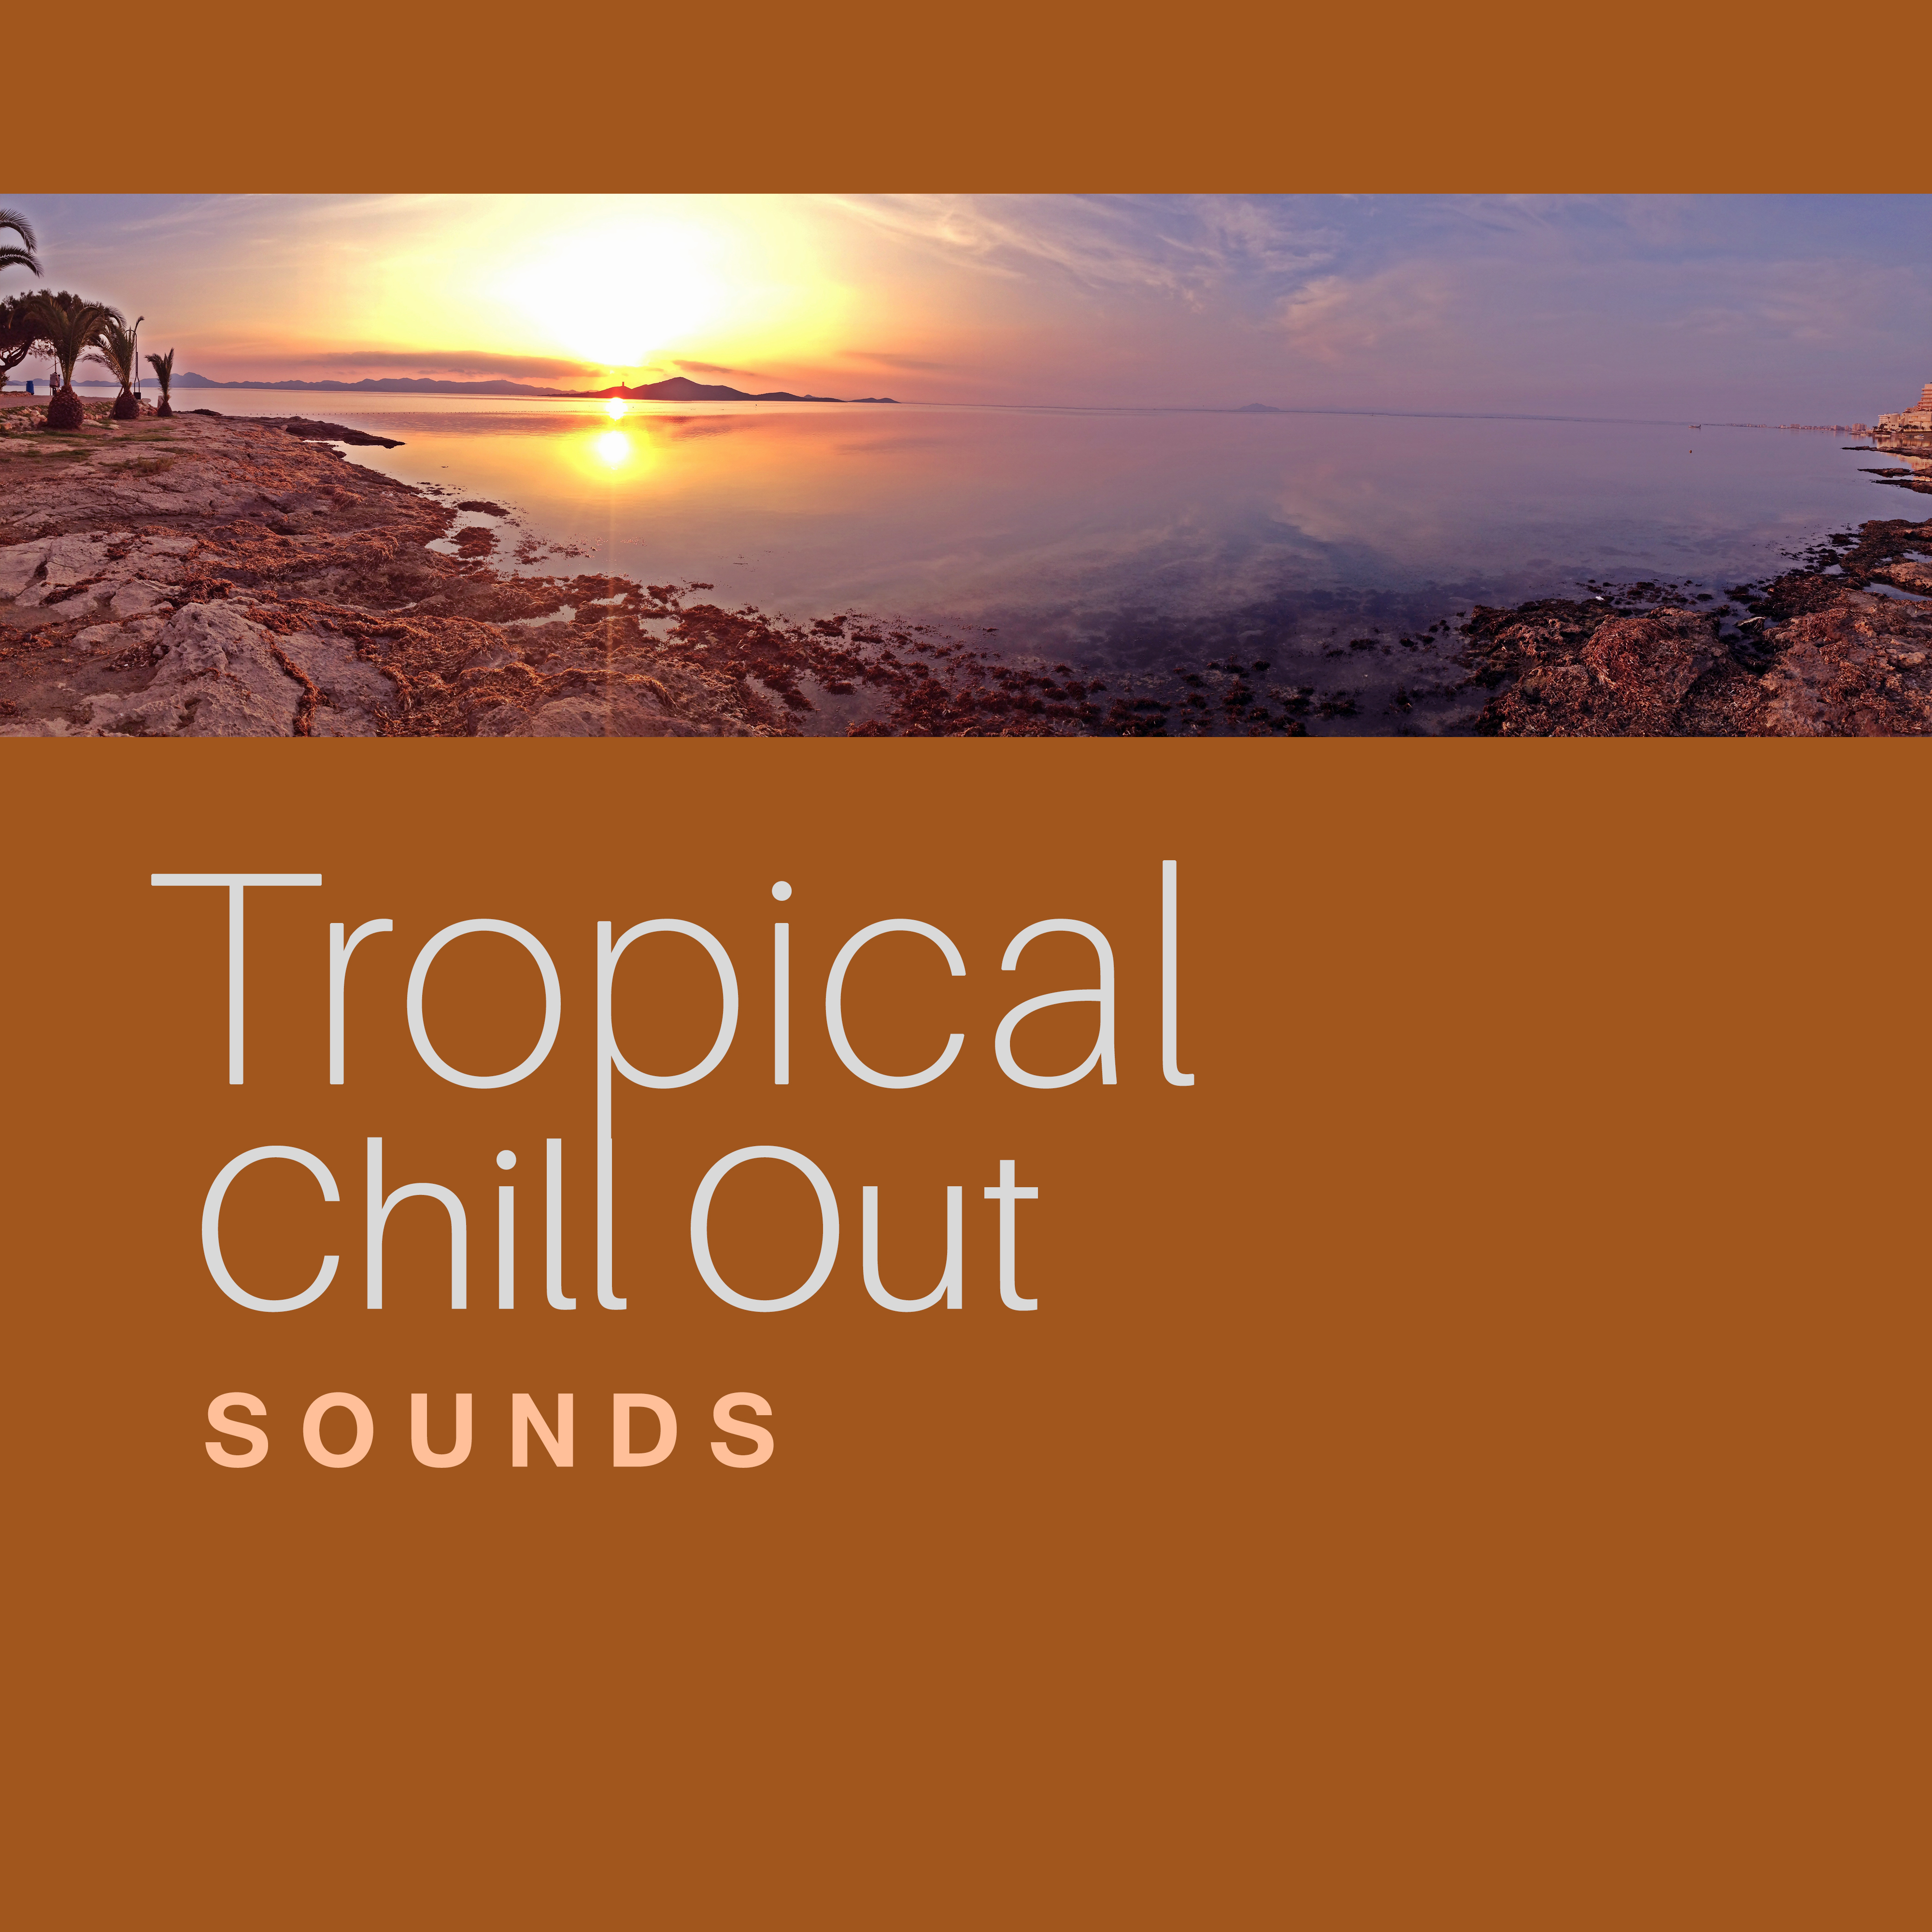 Tropical Chill Out Sounds – Summer Vibes, Holiday Music, Chill Out 2017, Peaceful Waves